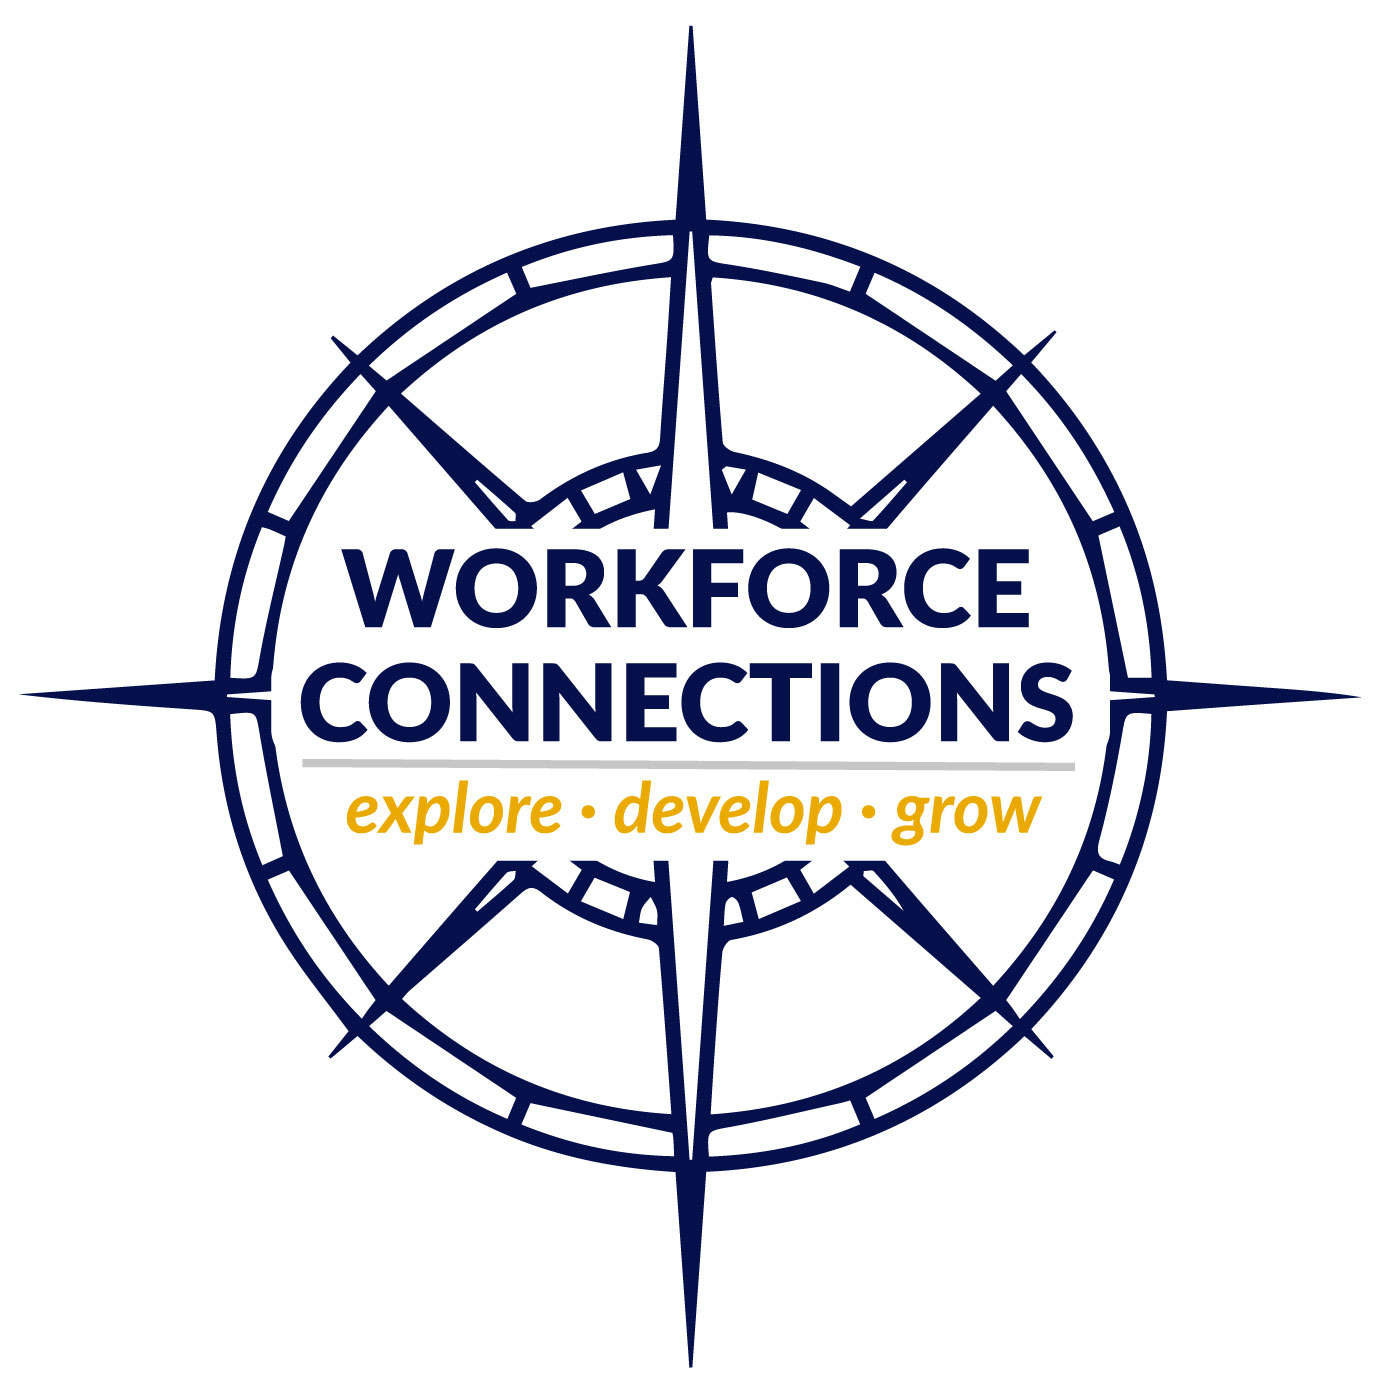 Workforce Connections Logo